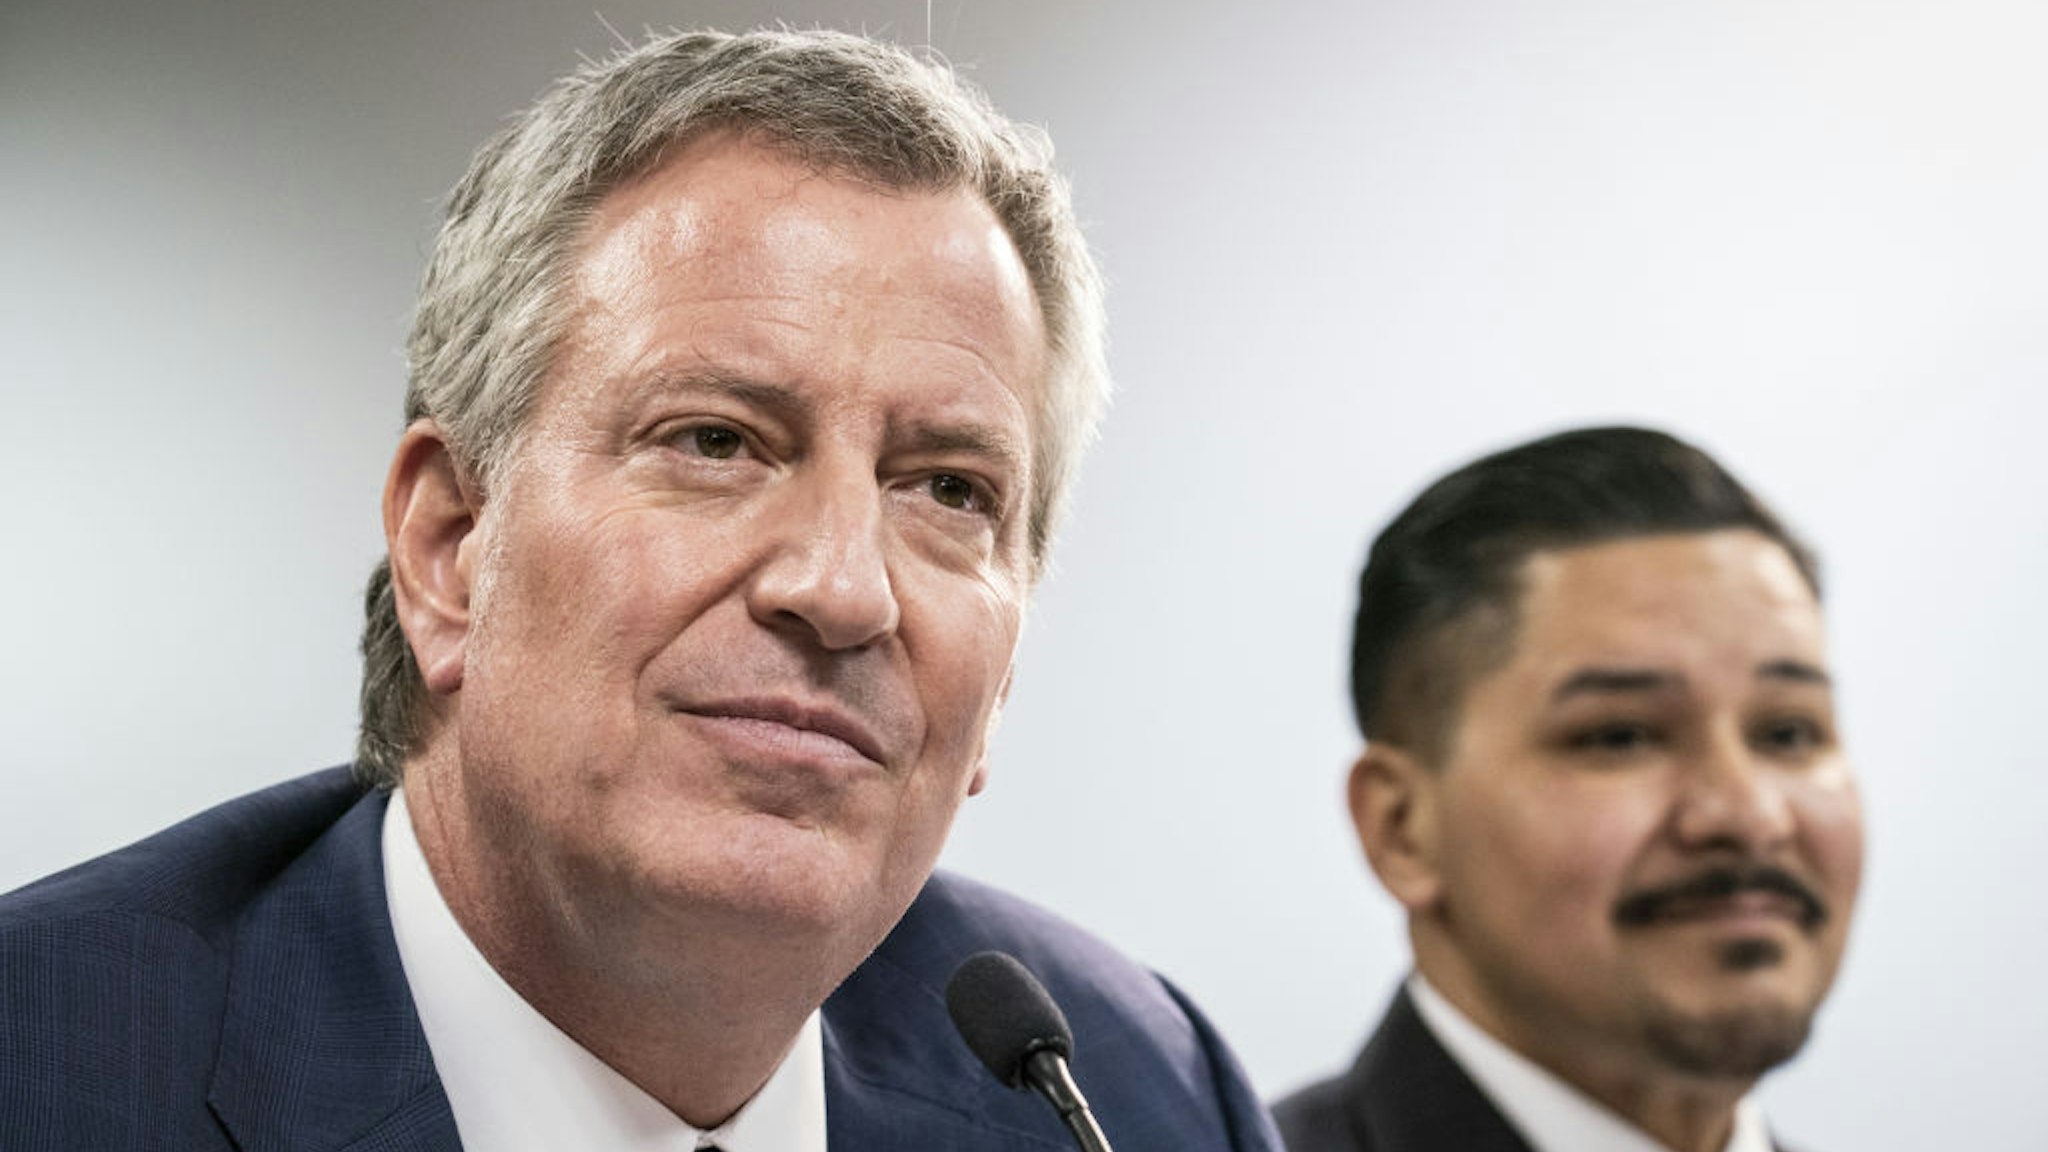 Bill de Blasio, mayor of New York, left, and Richard Carranza, chancellor of the New York City Department of Education, listen during a public hearing on school governance and mayoral control in New York, U.S., on Friday, March 15, 2019.